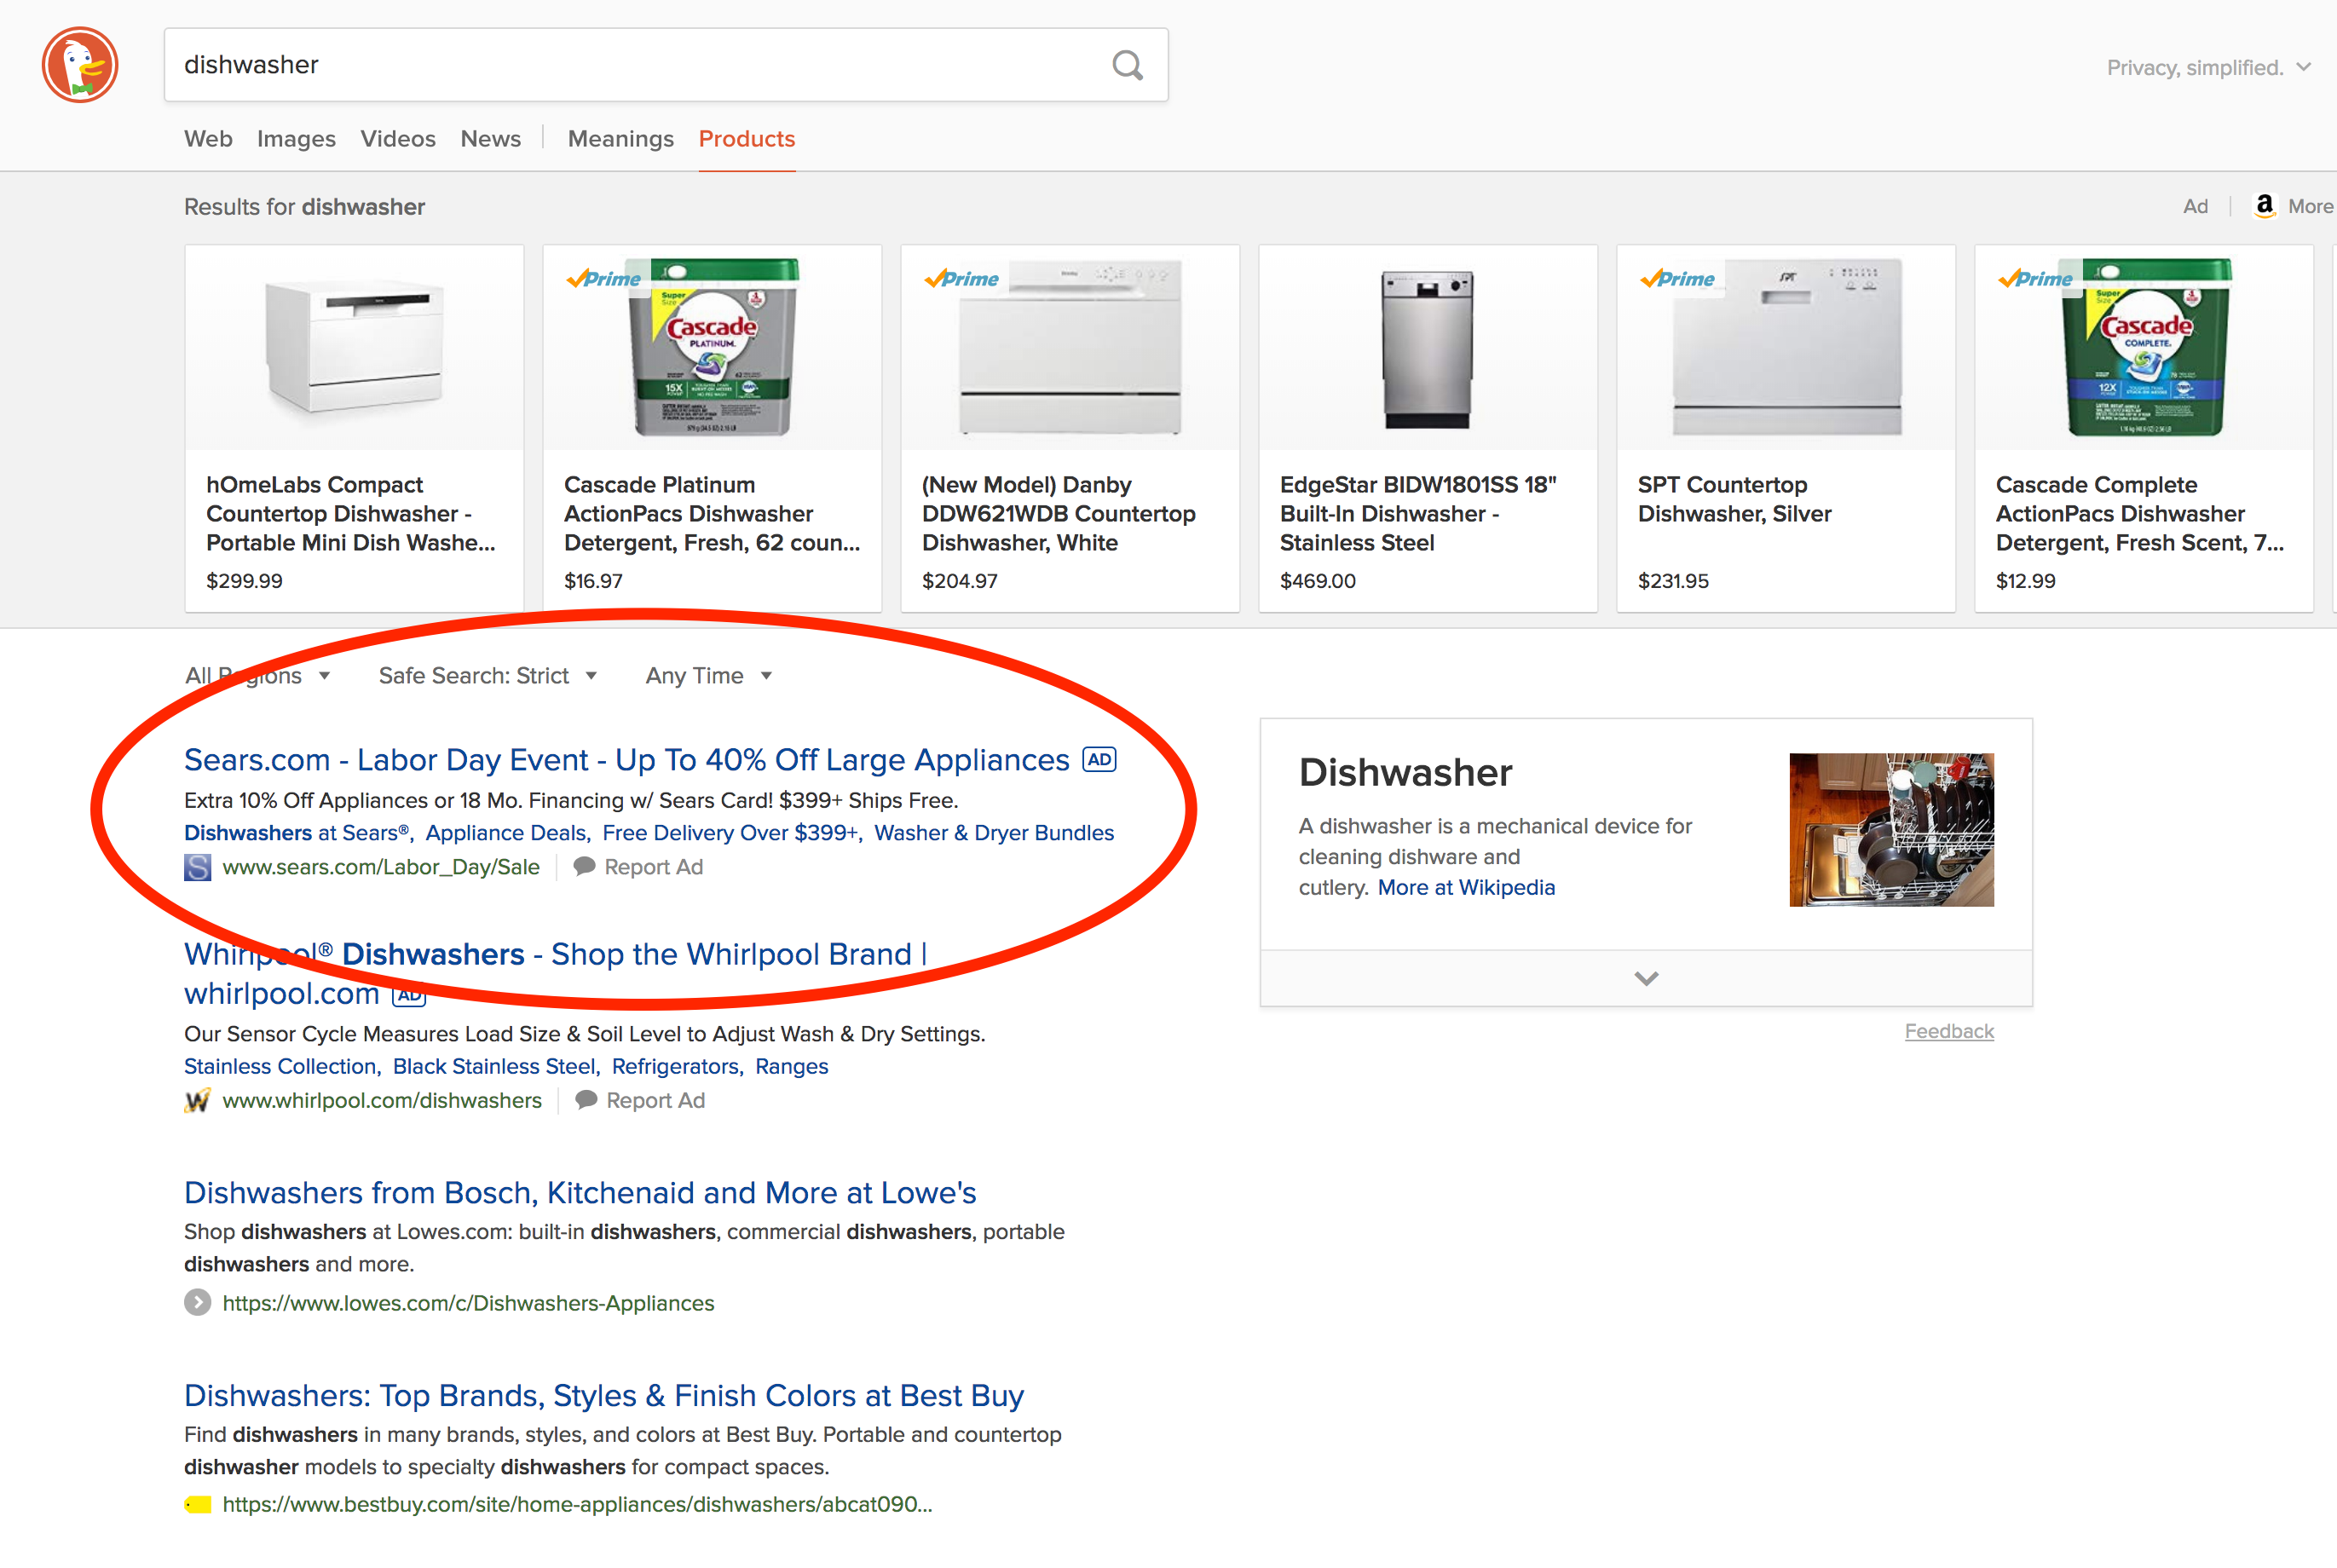 Screenshot of the DuckDuckGo search engine results page for "dishwasher" highlighting the two dishwasher ads served at the top of the page